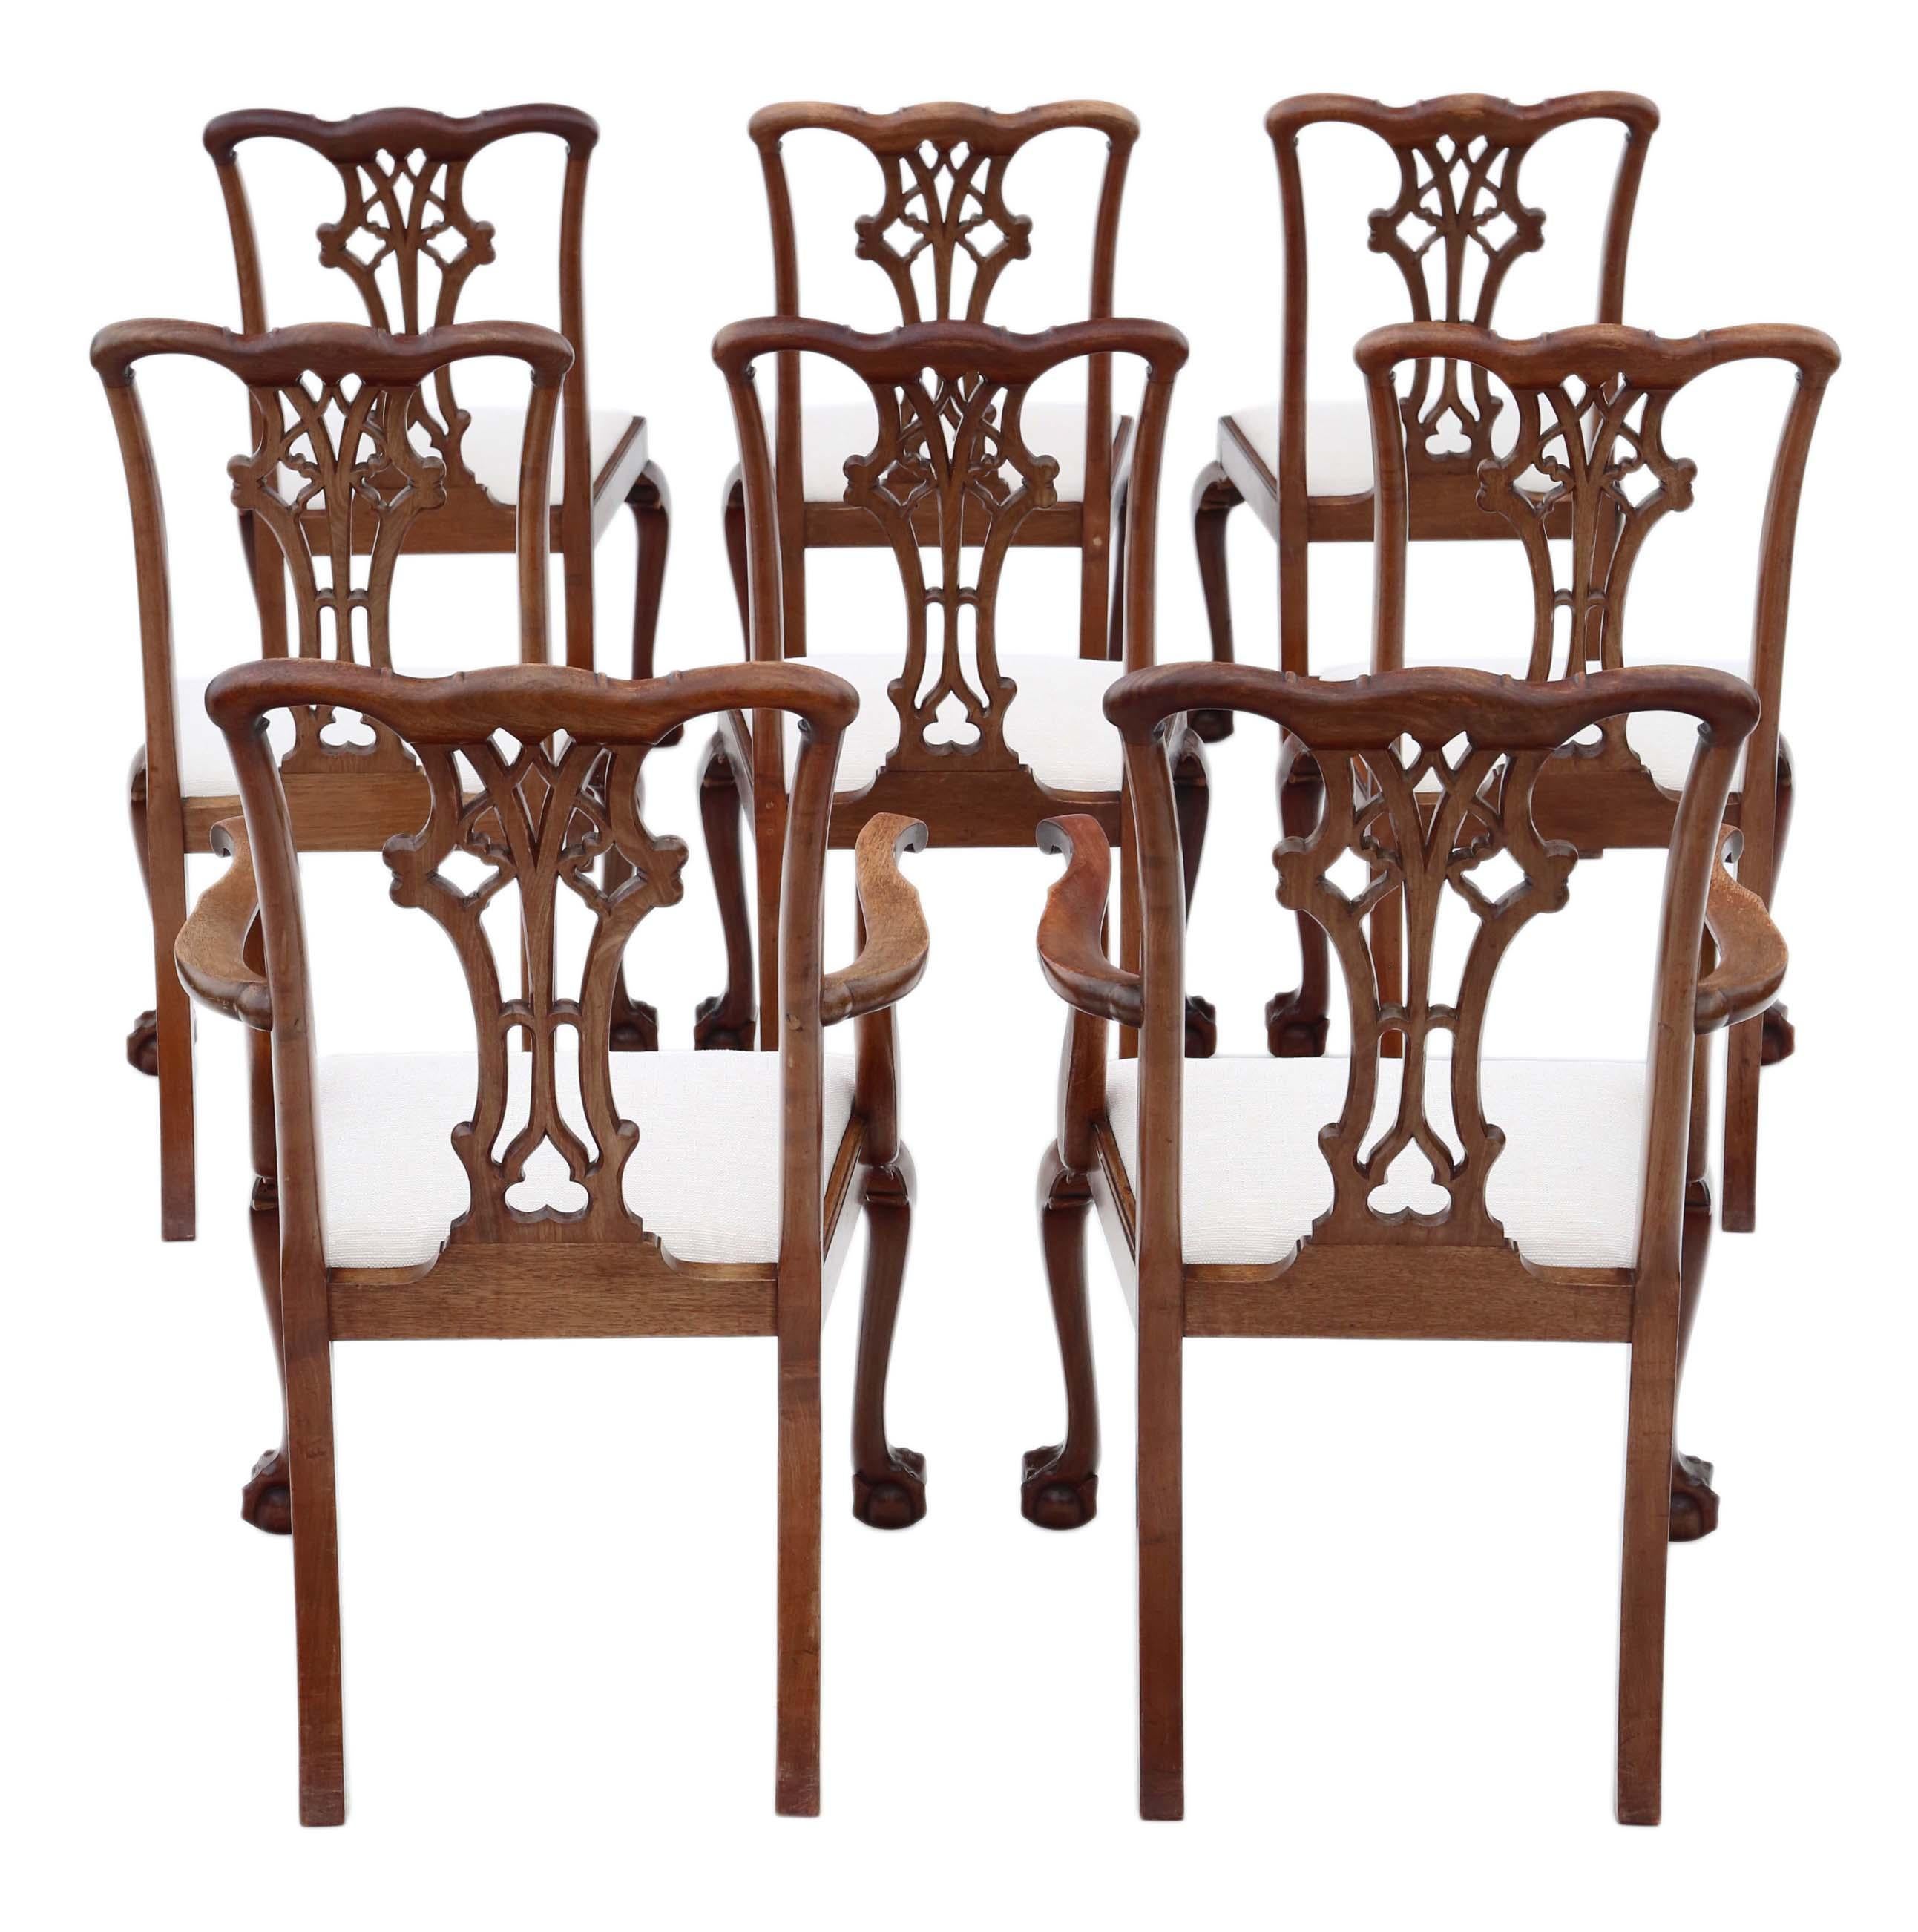 Georgian Revival Mahogany Dining Chairs: Set of 8 (6+2), Antique Quality, C1910 In Good Condition For Sale In Wisbech, Cambridgeshire